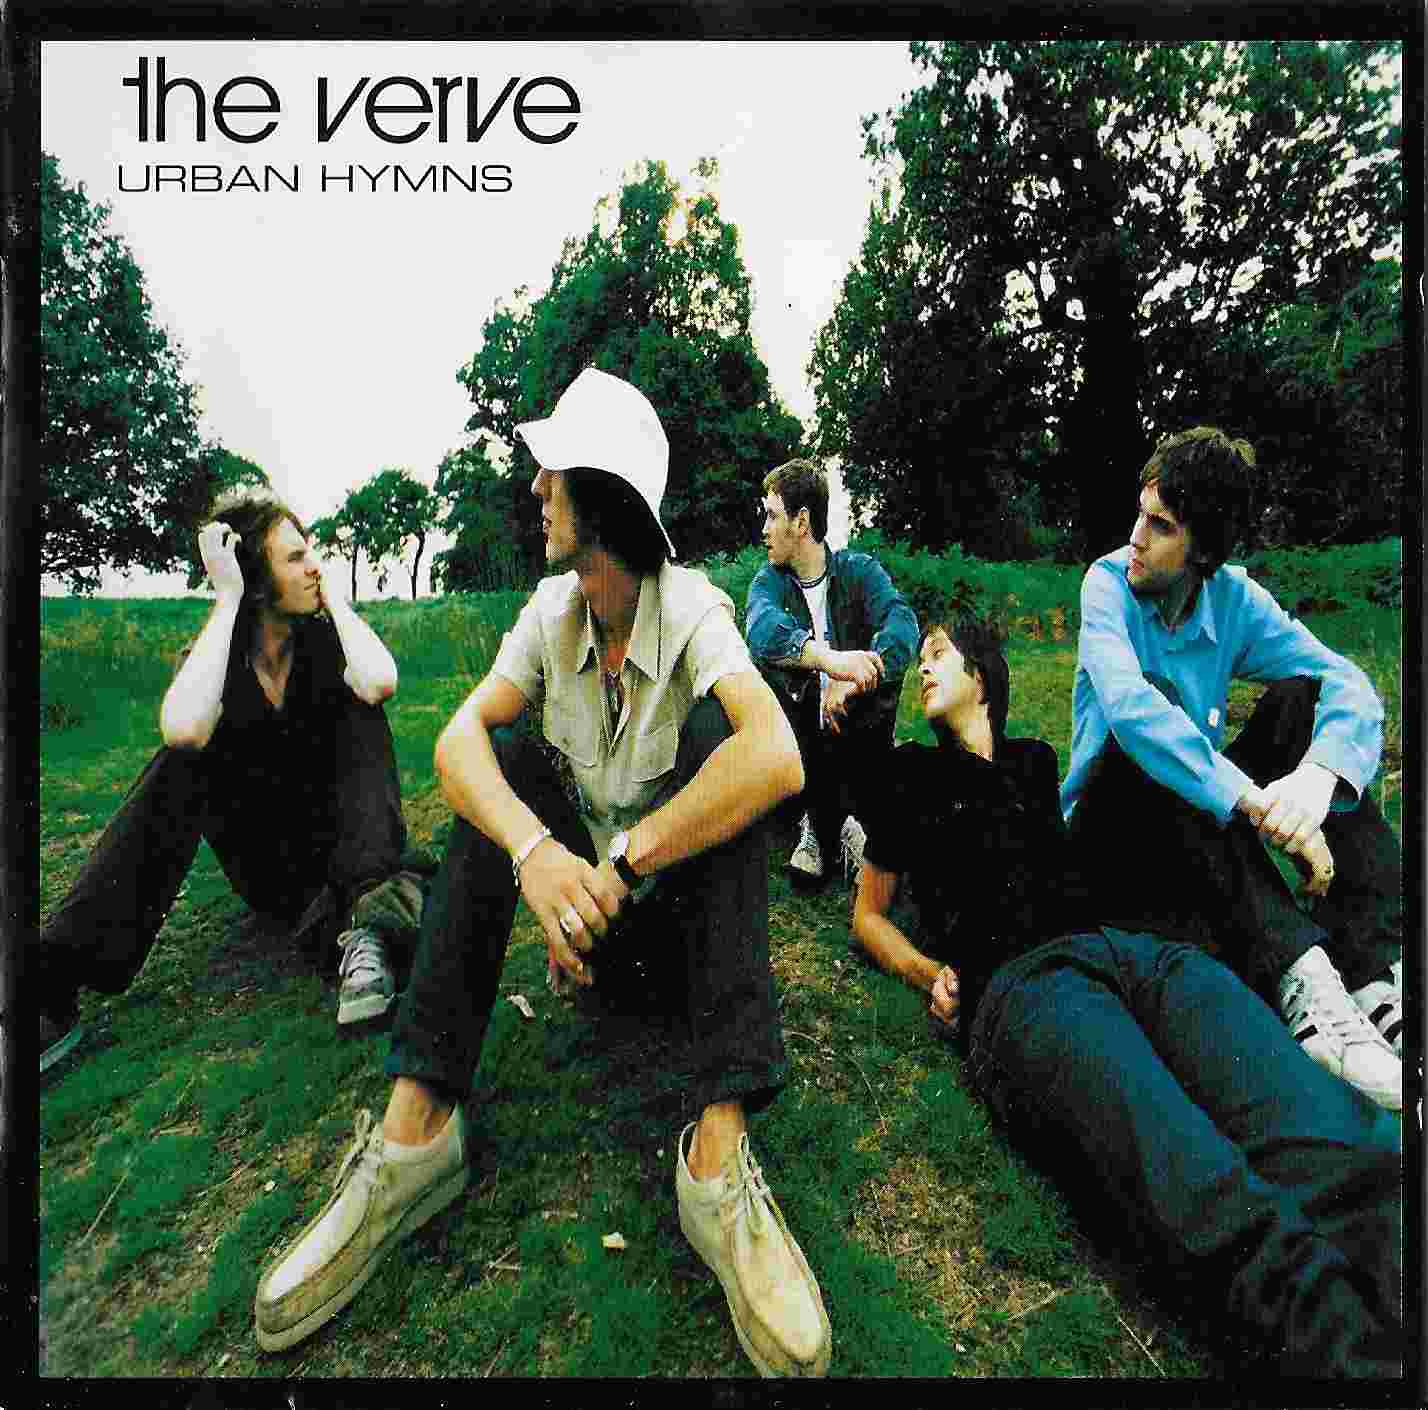 Picture of Urban hymns by artist The Verve 